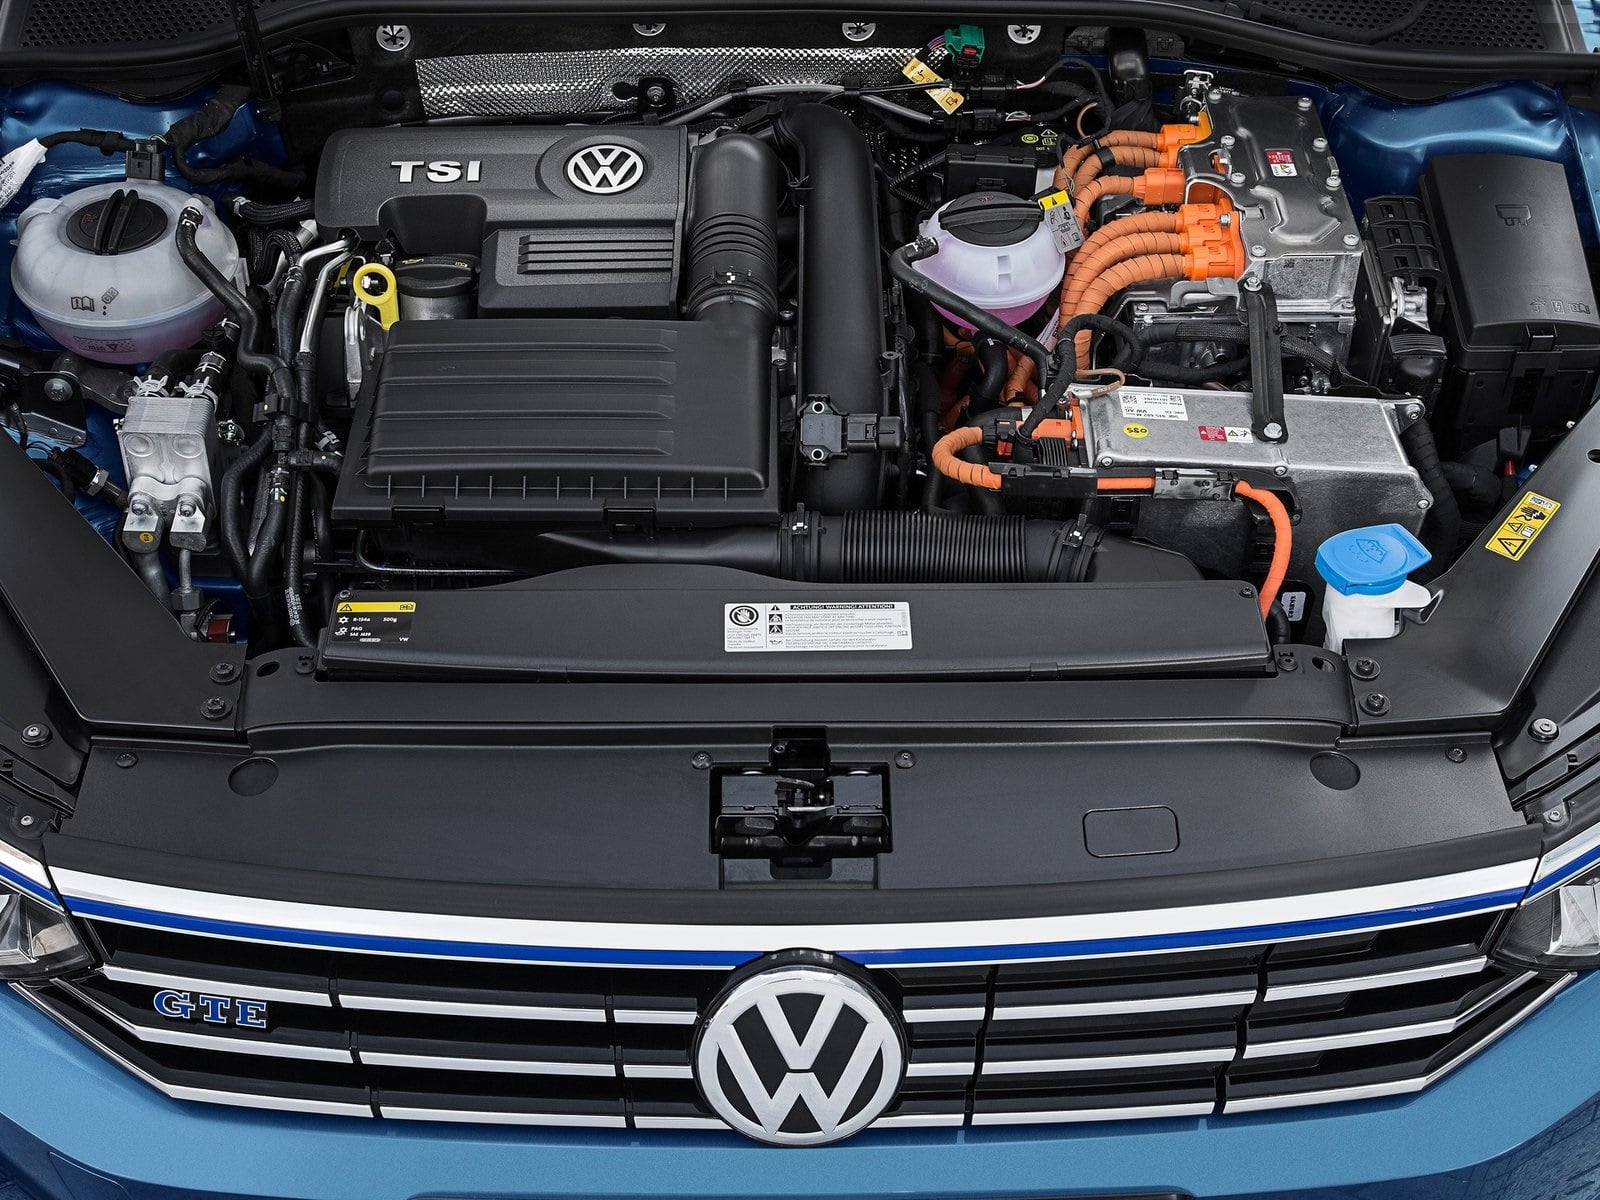 Volkswagen's 1.0-litre Petrol Engine To Be Localized For India: Skoda